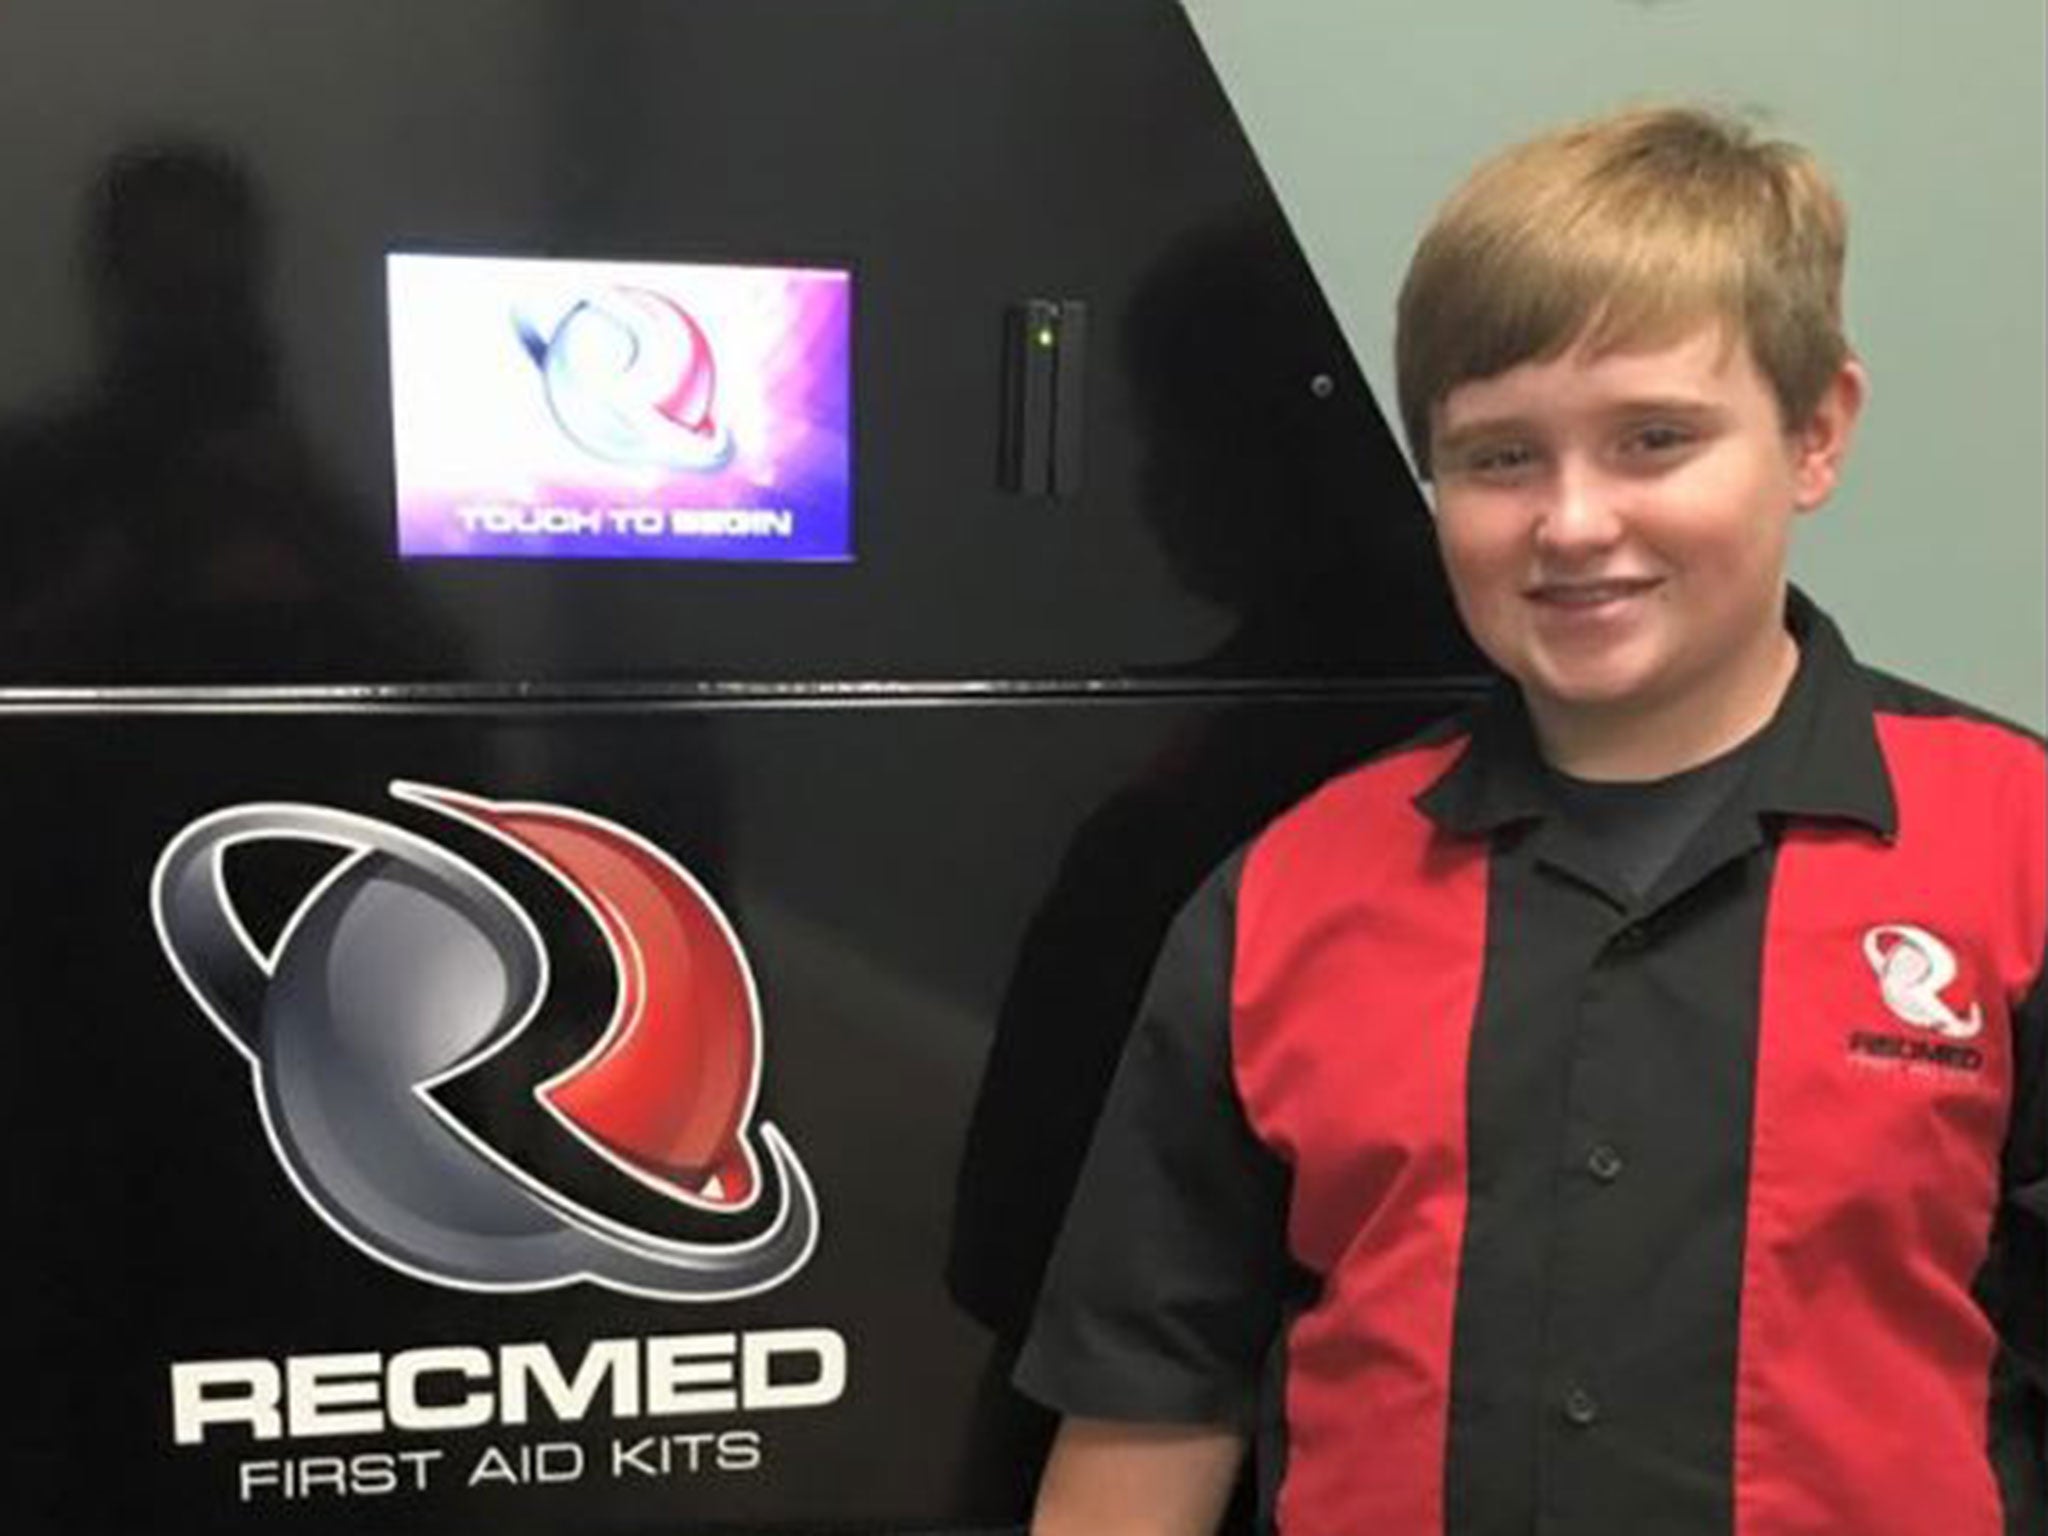 Taylor Rosenthal, 14, demonstrates one of his RecMed first aid vending machines